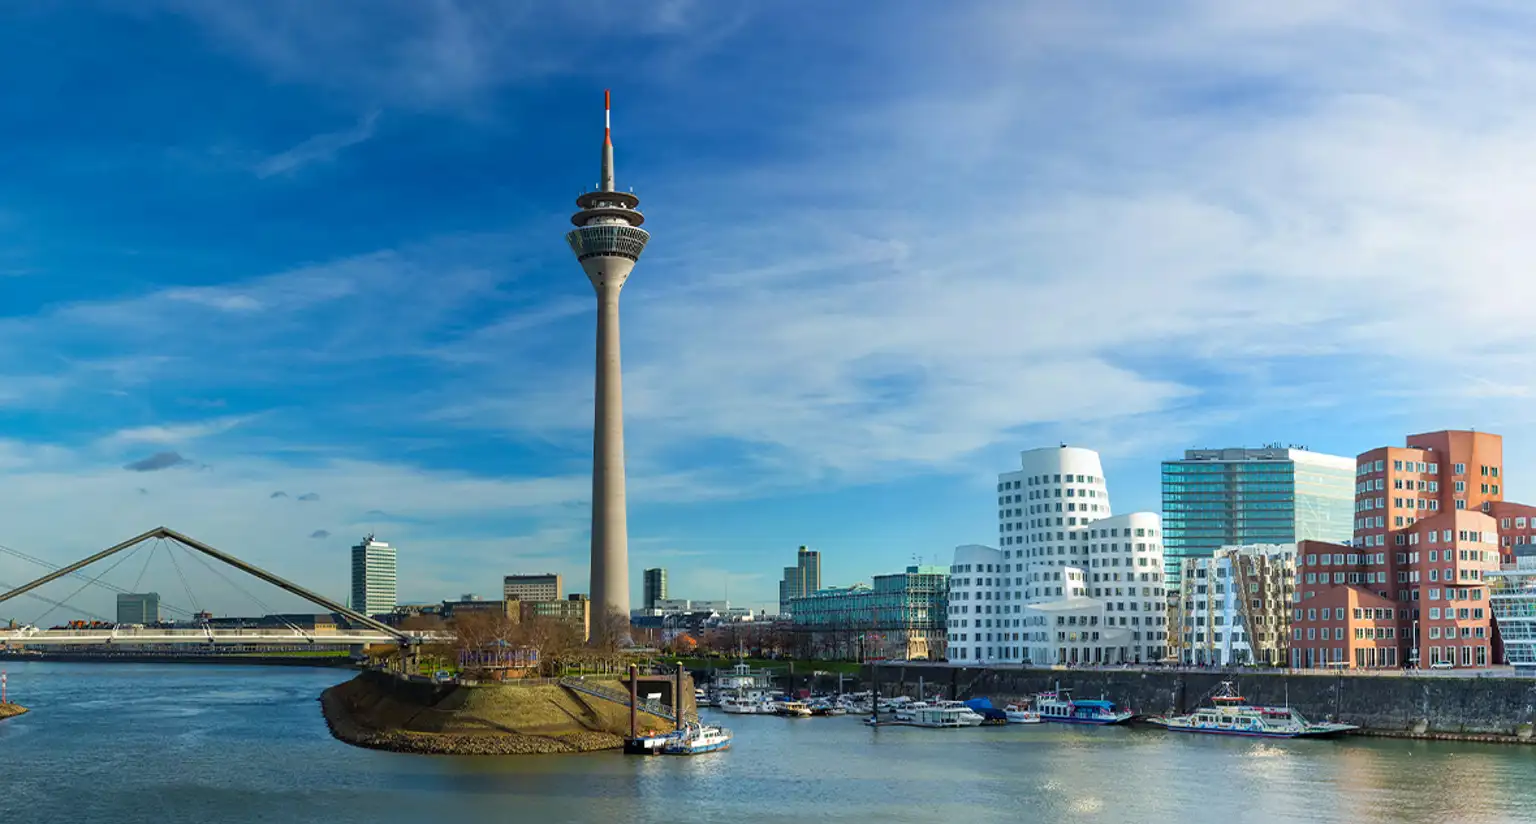 10 things you must see and do in Düsseldorf